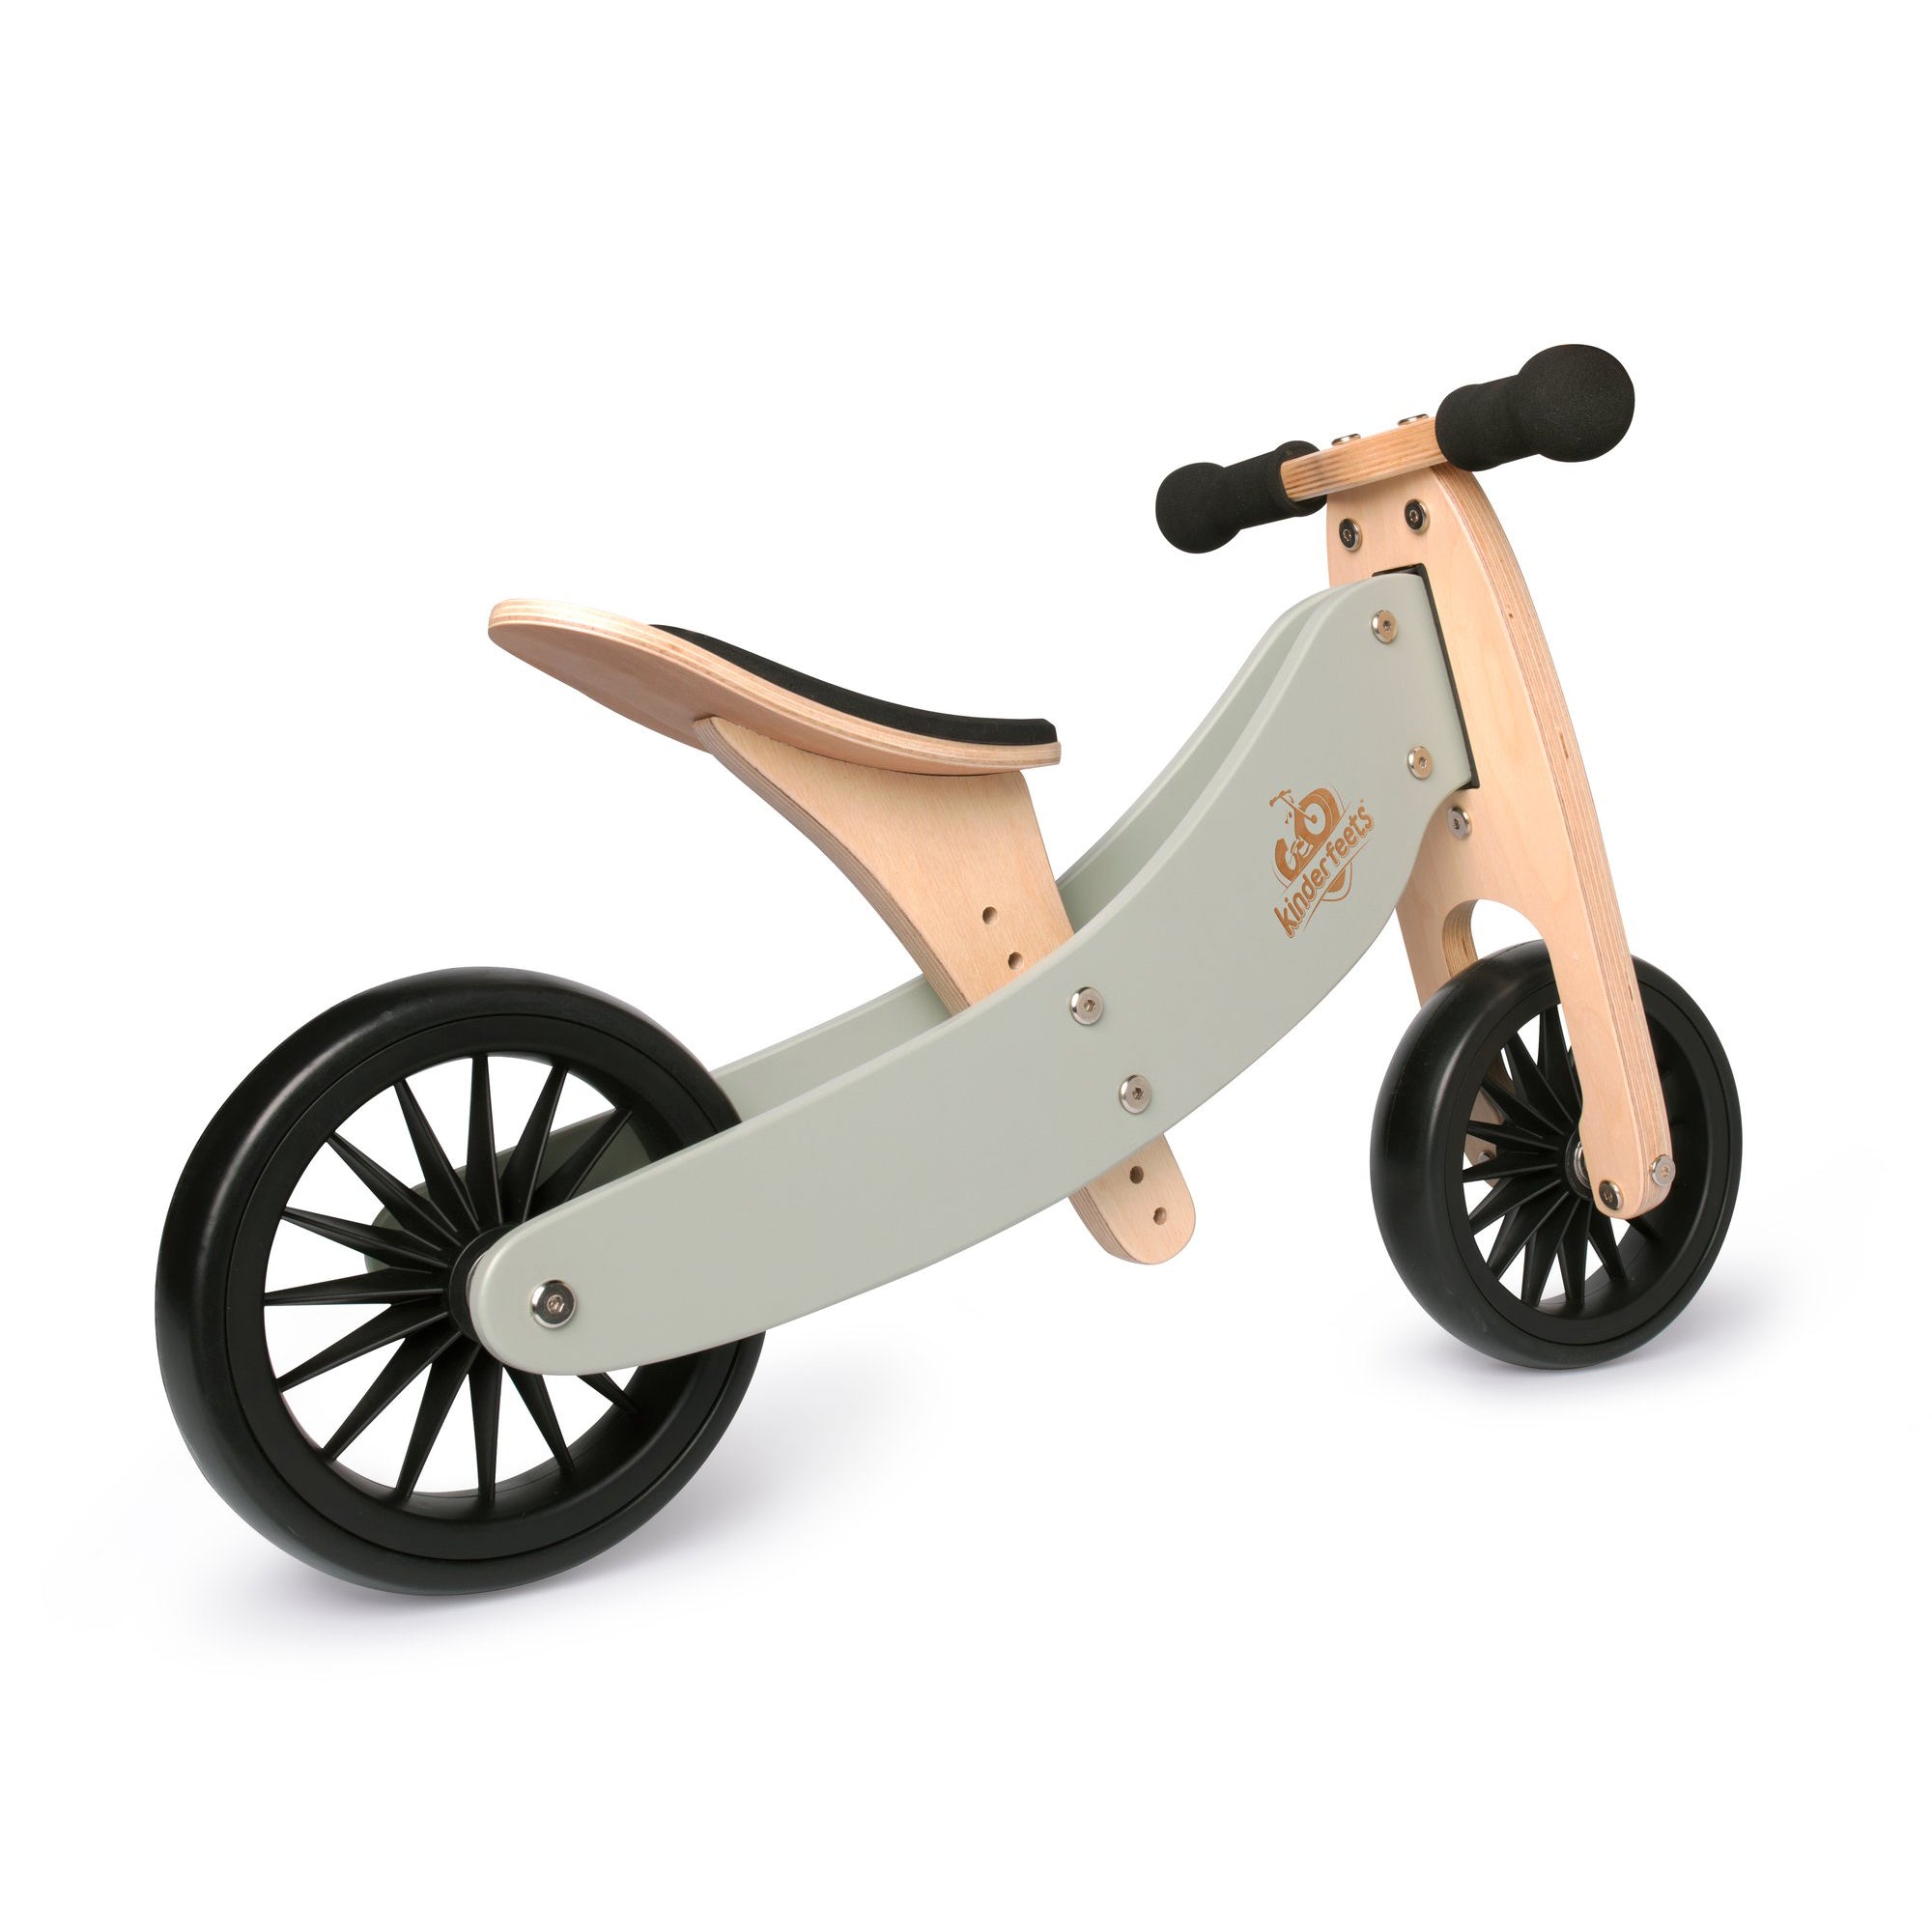 kinderfeets-2-in-1-tiny-tot-plus-tricycle-&-balance-bike-silver-sage-kinf-03620- (1)